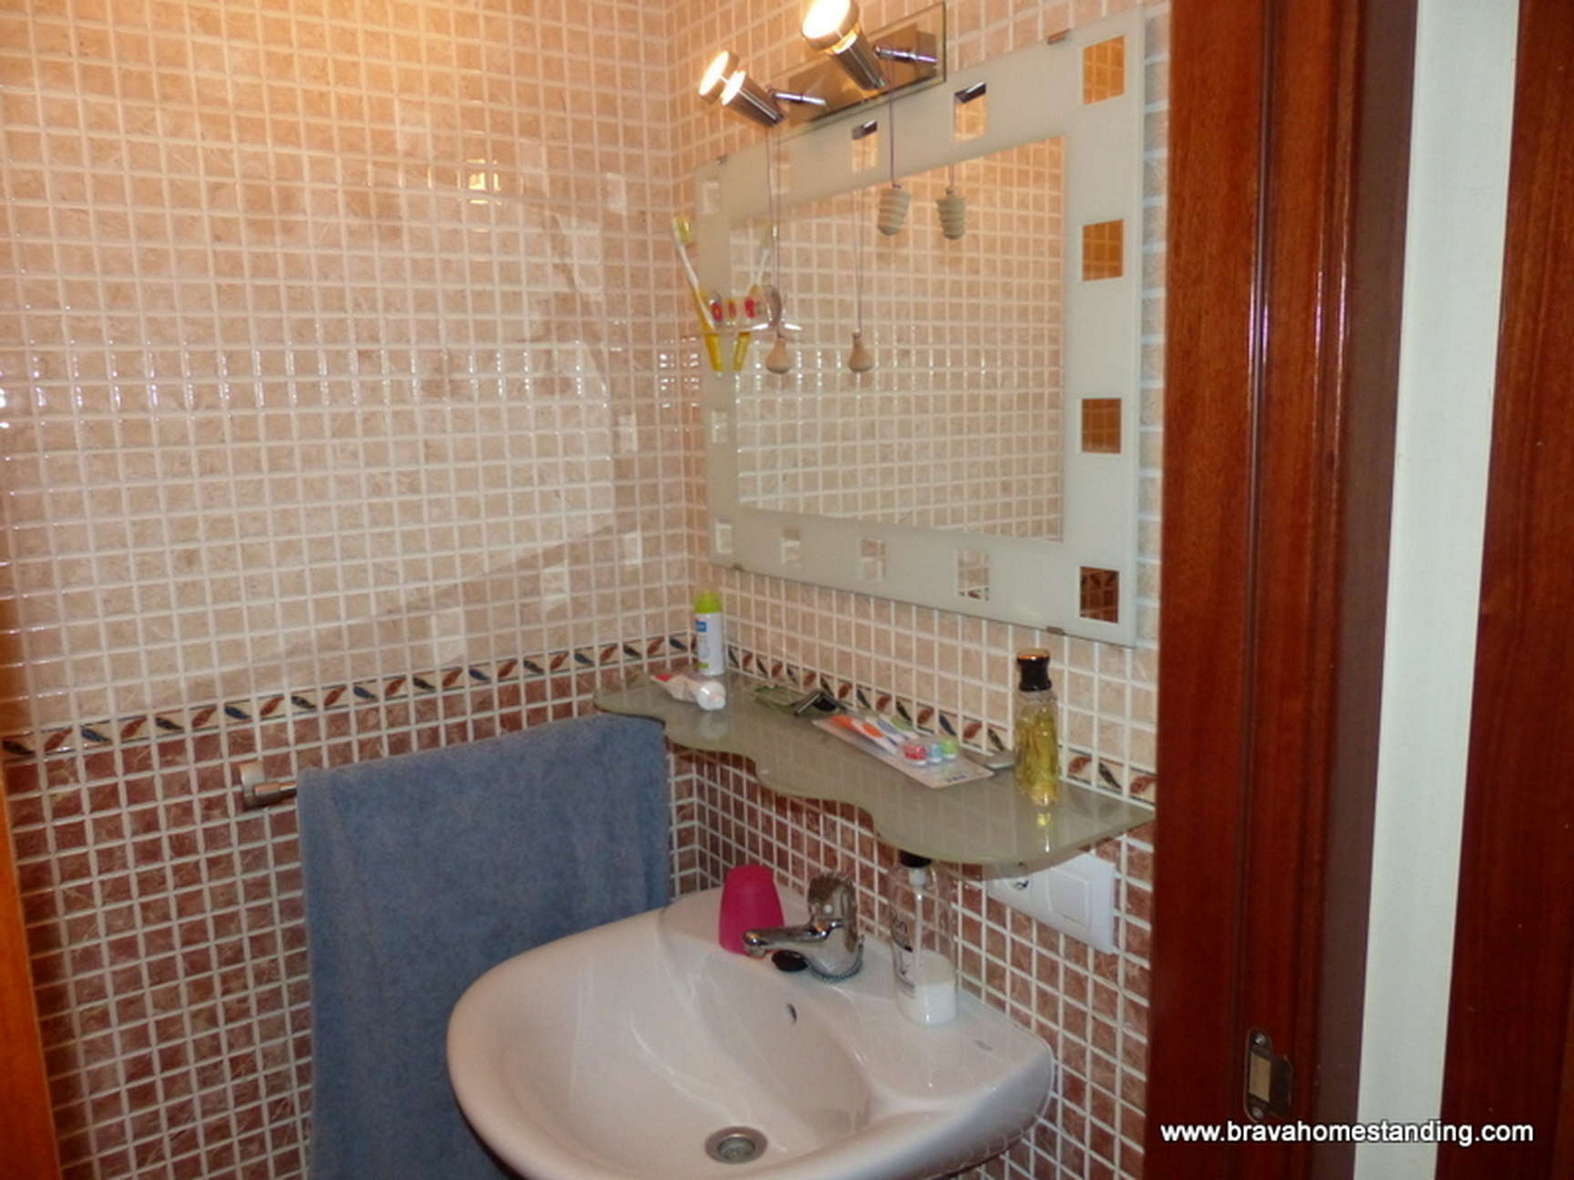 BEAUTIFUL HOUSE ALMOST NEW FOR SALE IN EMPURIABRAVA